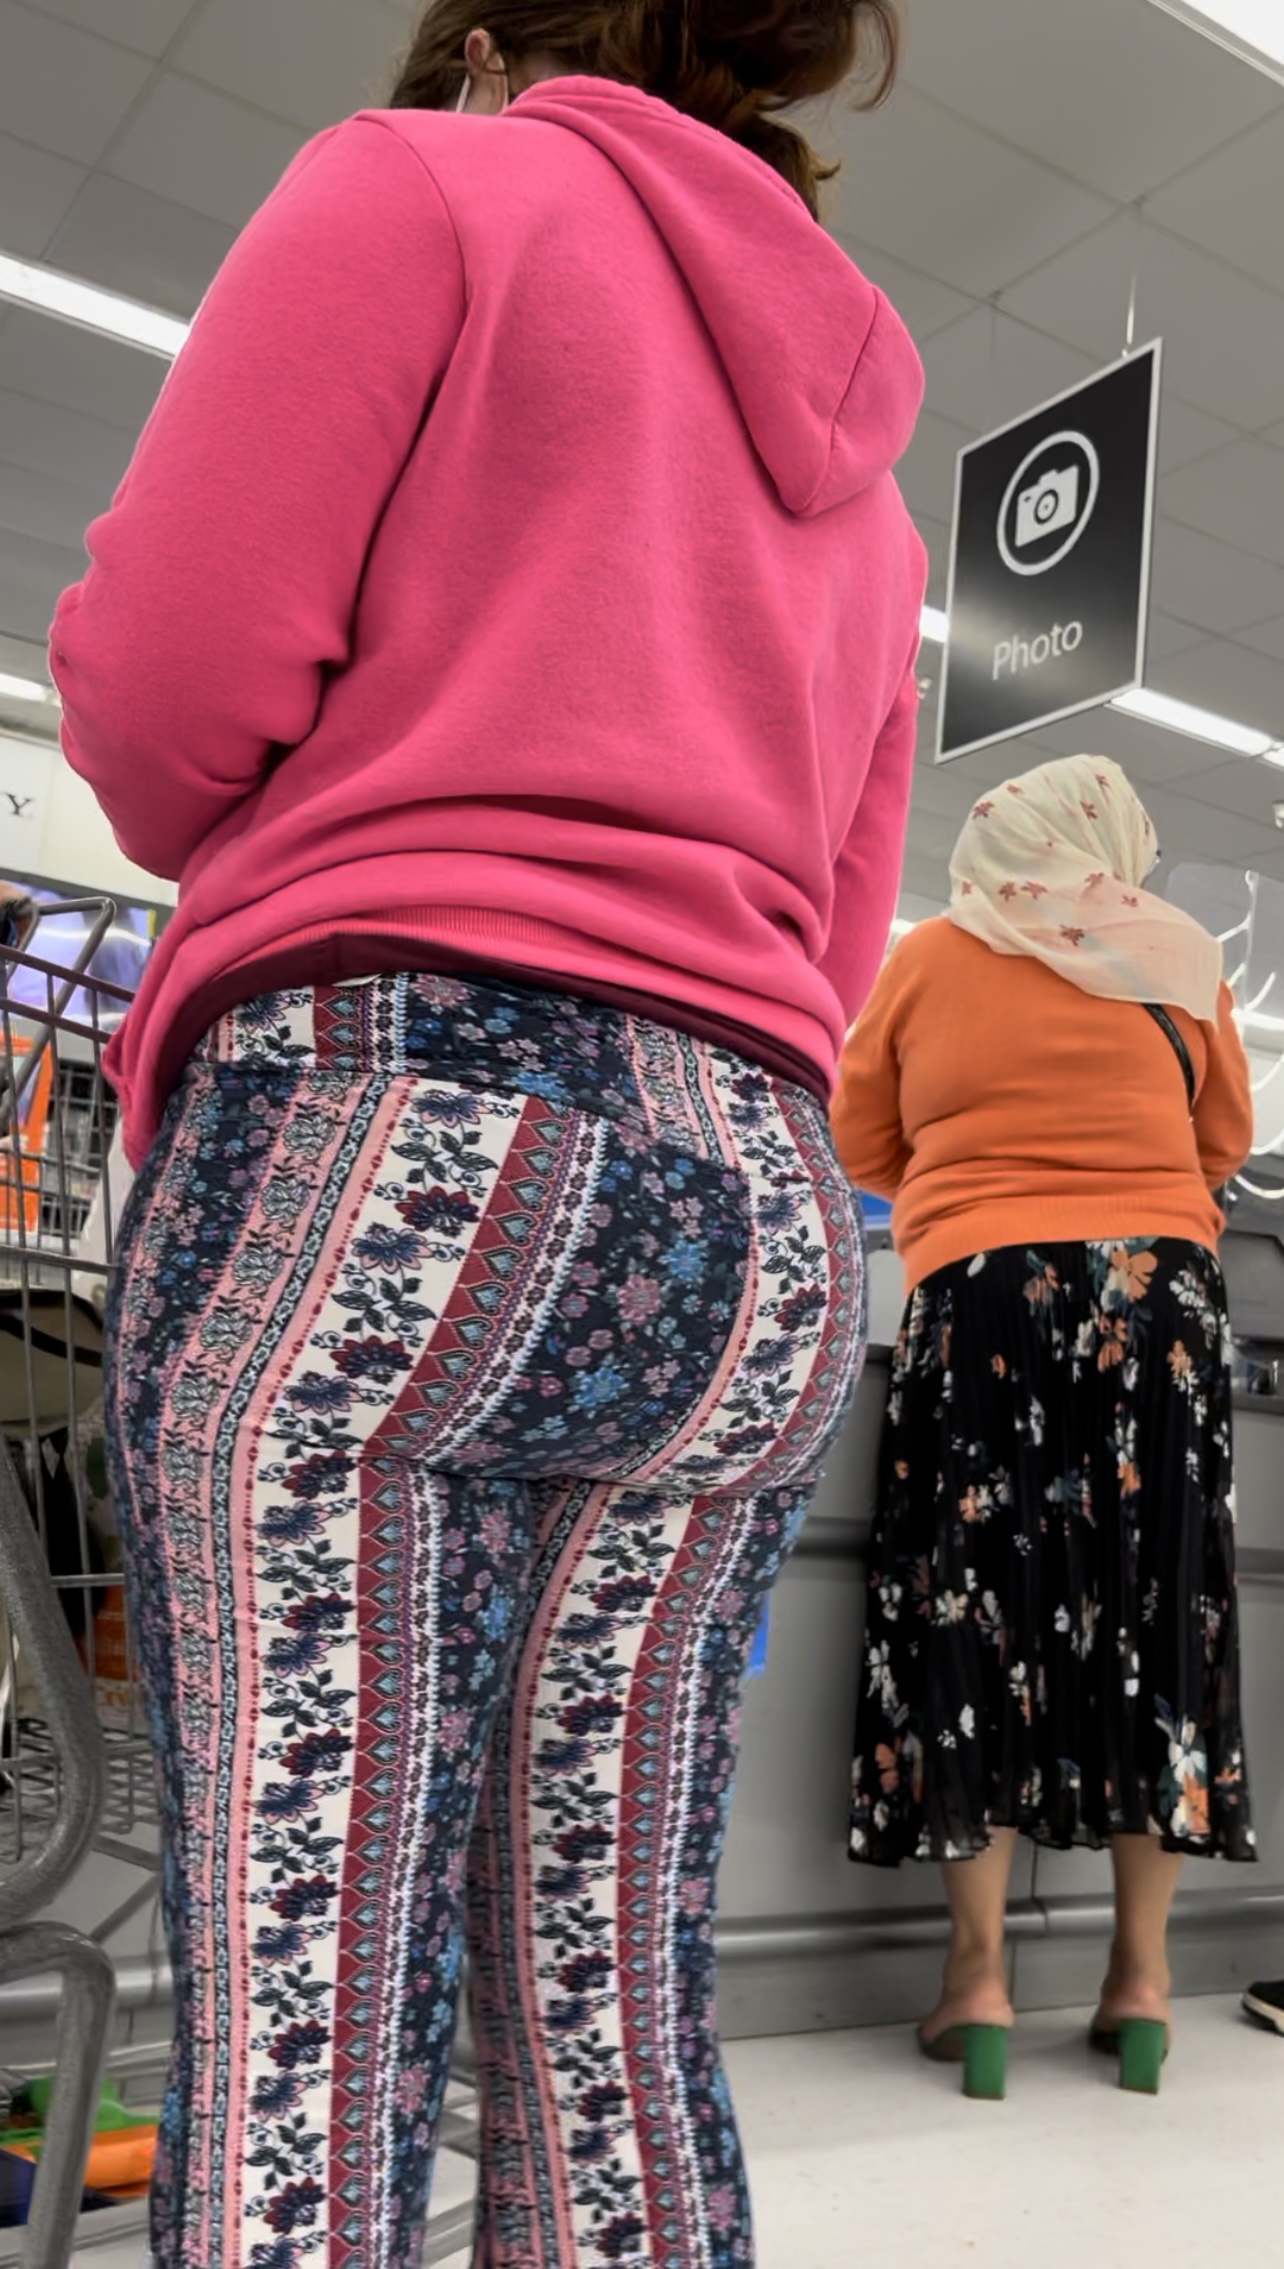 Crazy Thick Pawg Milf Flare Legging Bubble Butt Spandex Leggings And Yoga Pants Forum